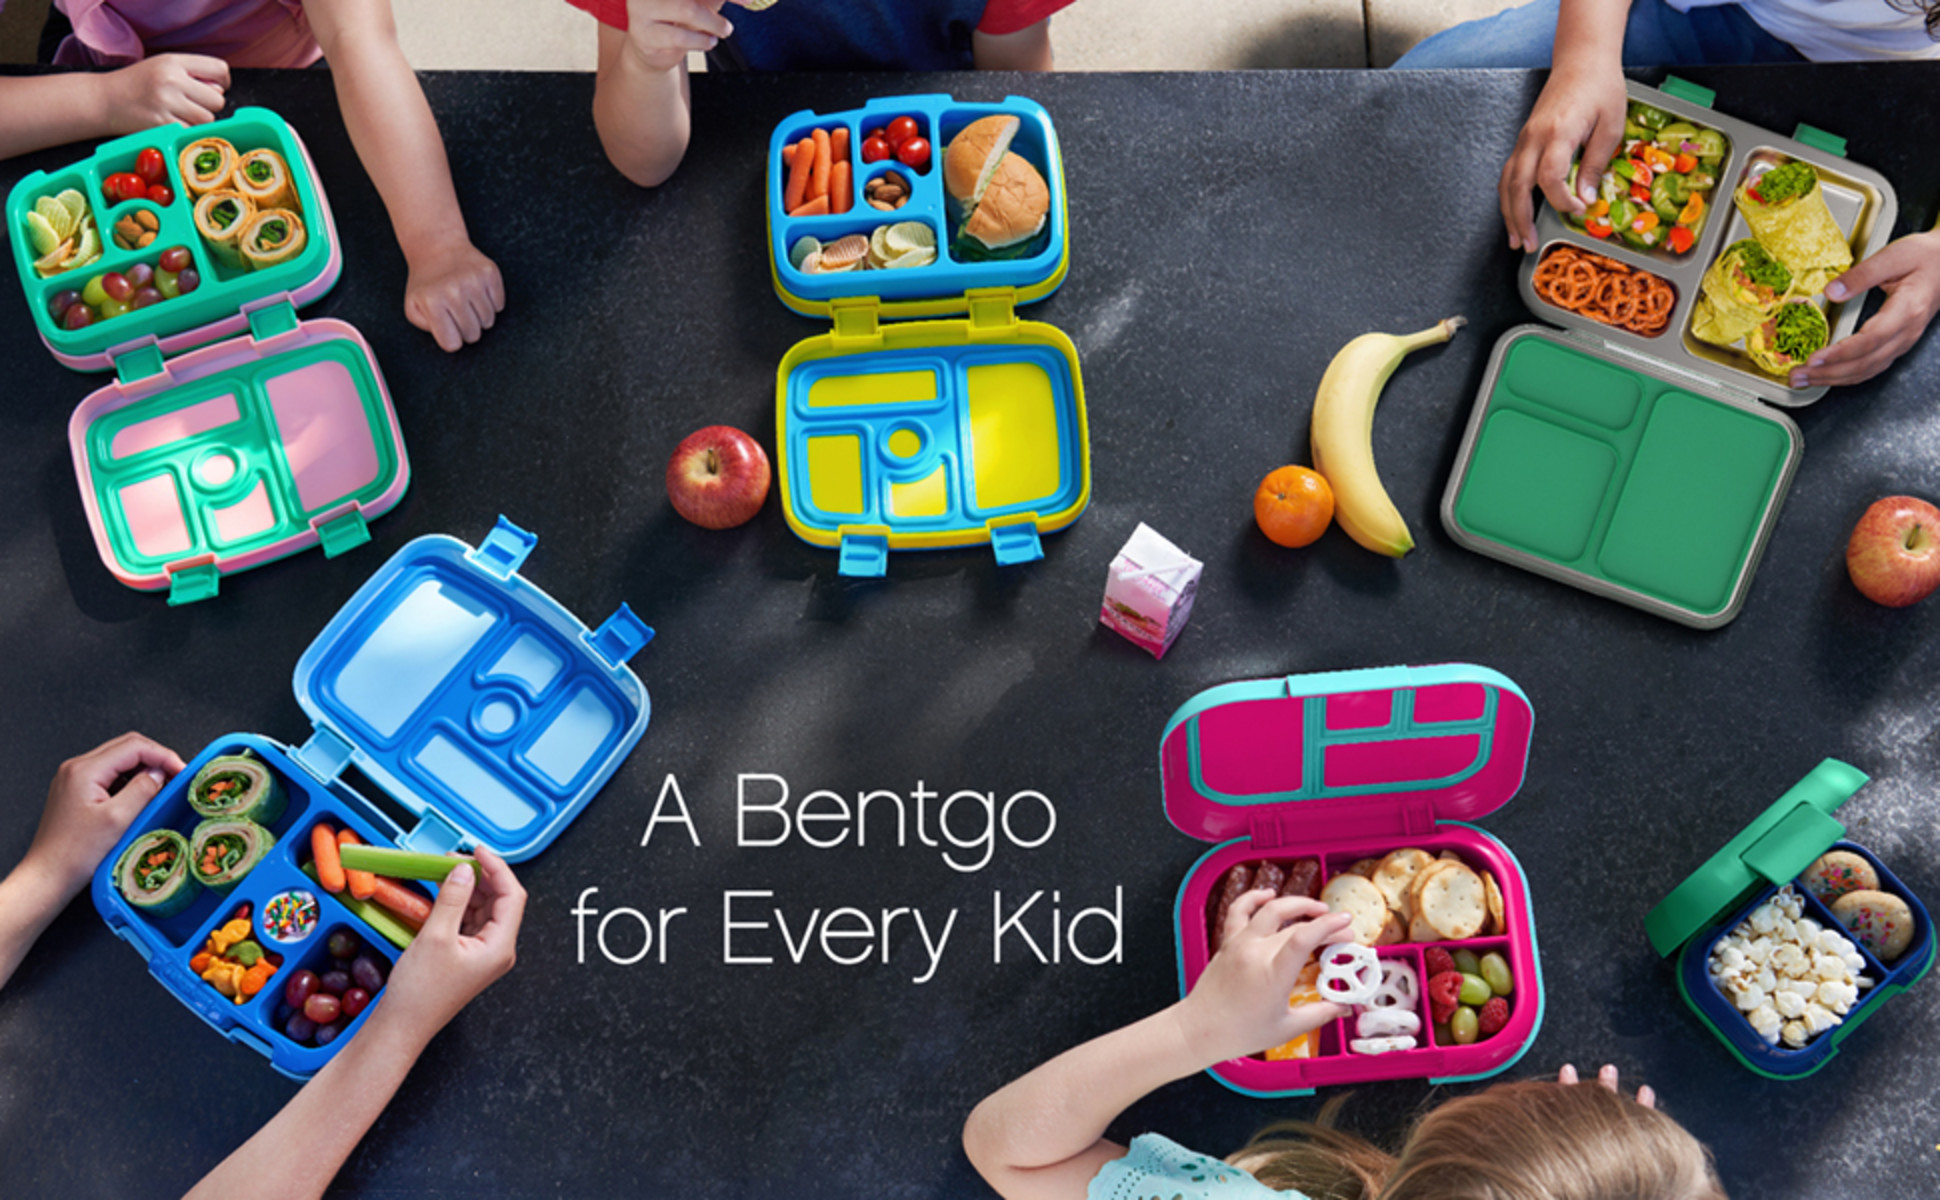 Bentgo® Kids Chill Lunch Box - Bento-Style Lunch Solution with 4 Compa —  Fashion Kings NY